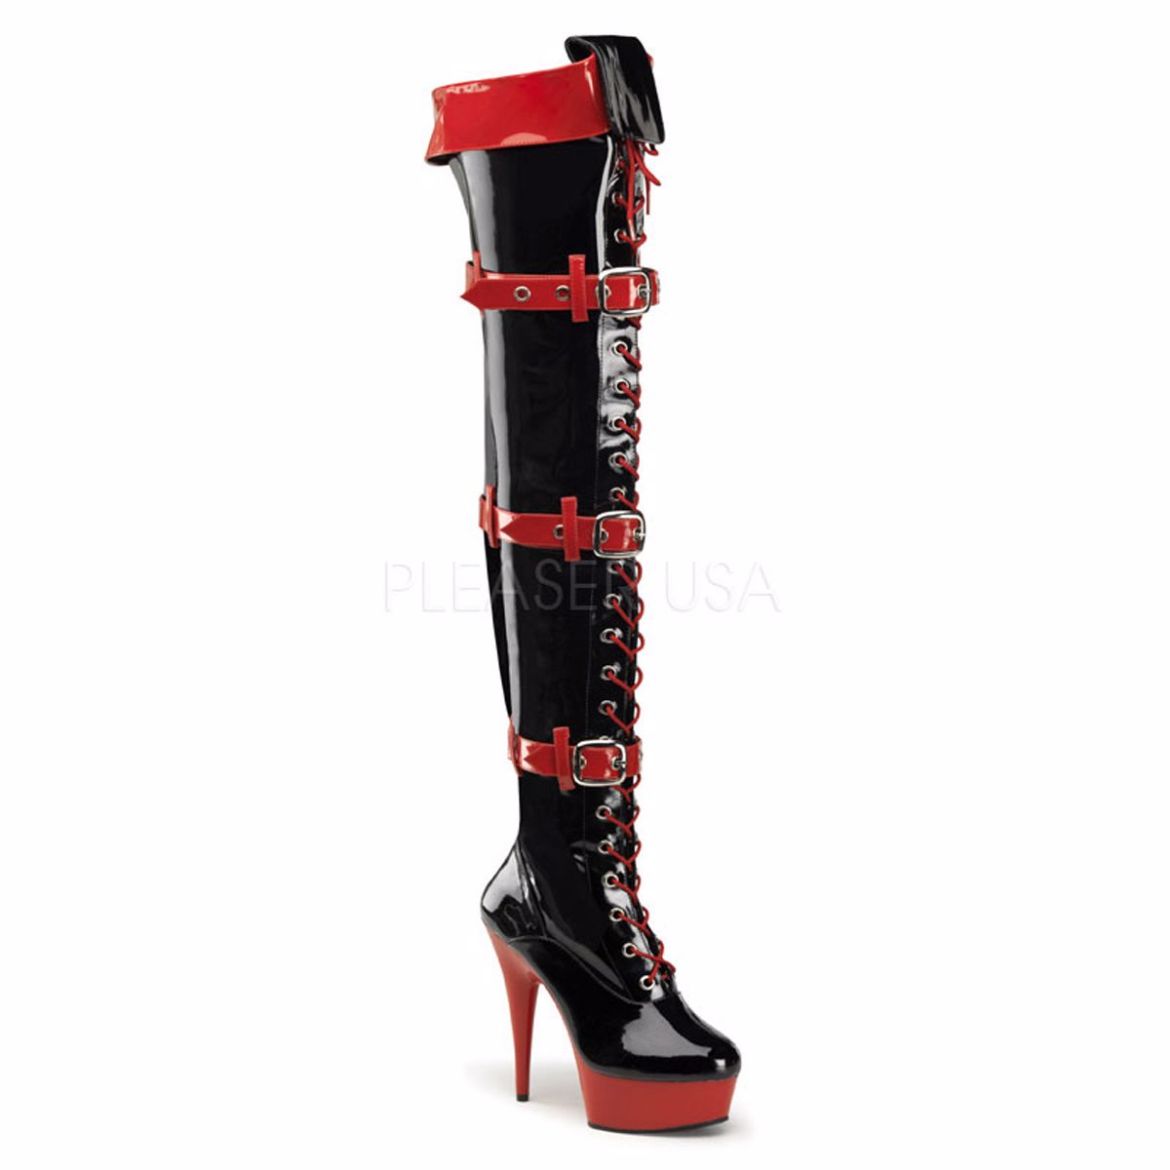 Product image of Funtasma Medic-3028 Black-Red Patent/Red, 6 inch (15.2 cm) Heel, 1 3/4 inch (4.4 cm) Platform Thigh High Boot